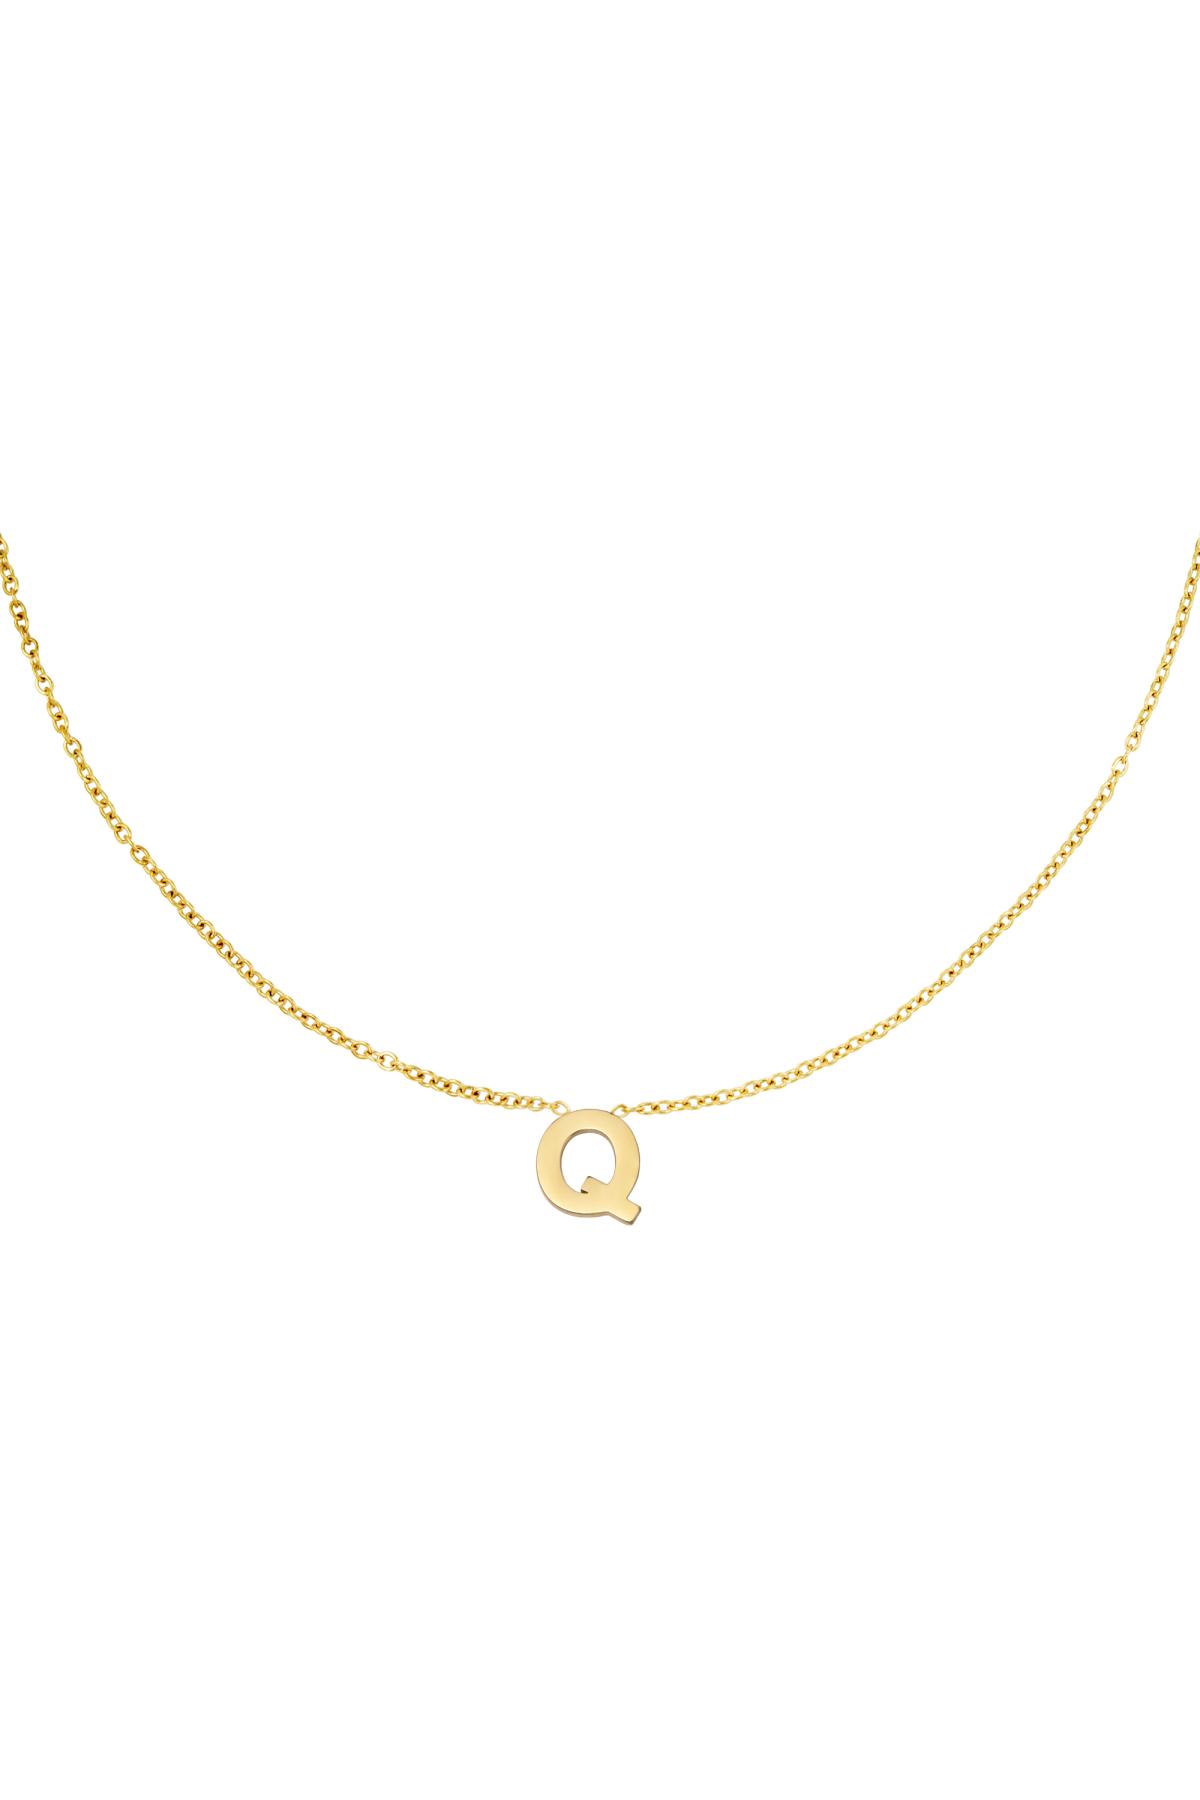 Stainless steel necklace initial Q Gold